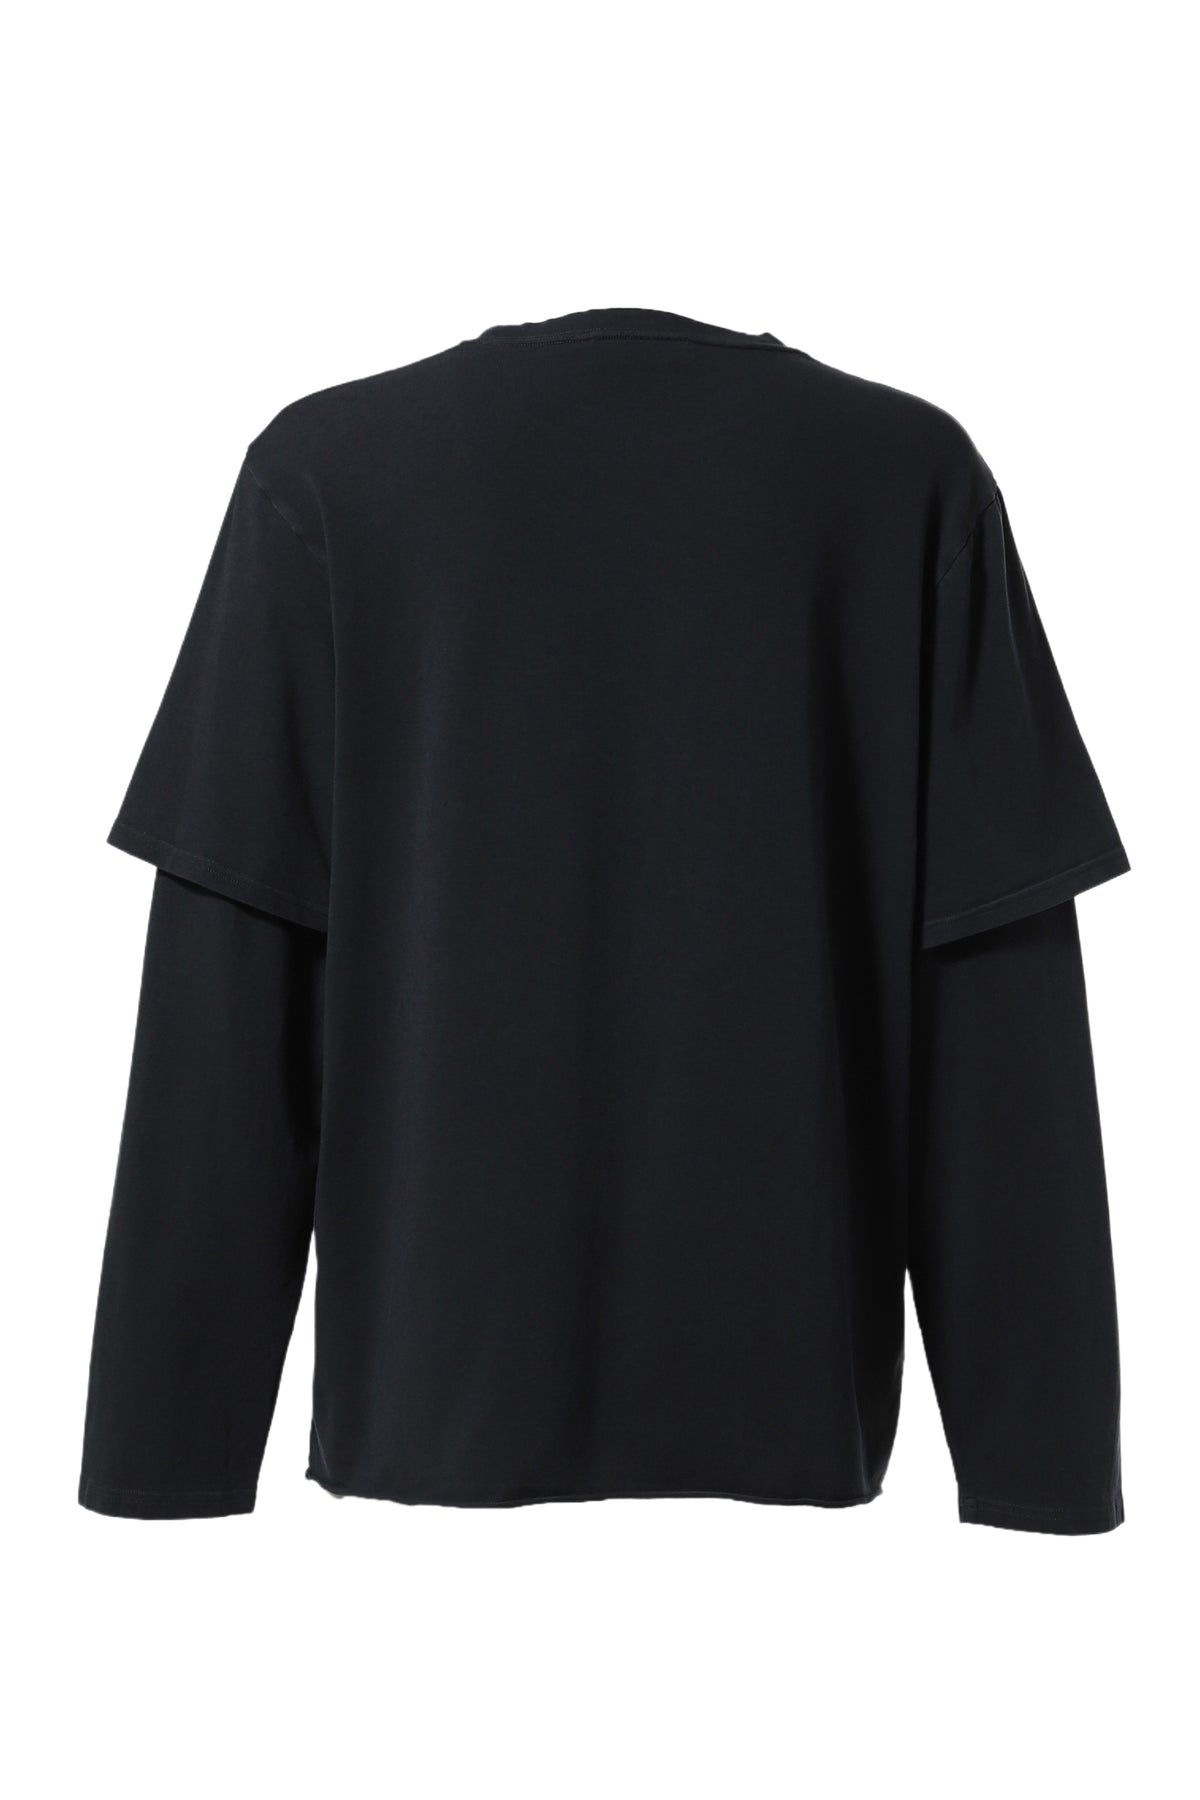 LONG SLEEVE DOUBLE SHIRT / WAHED BLK